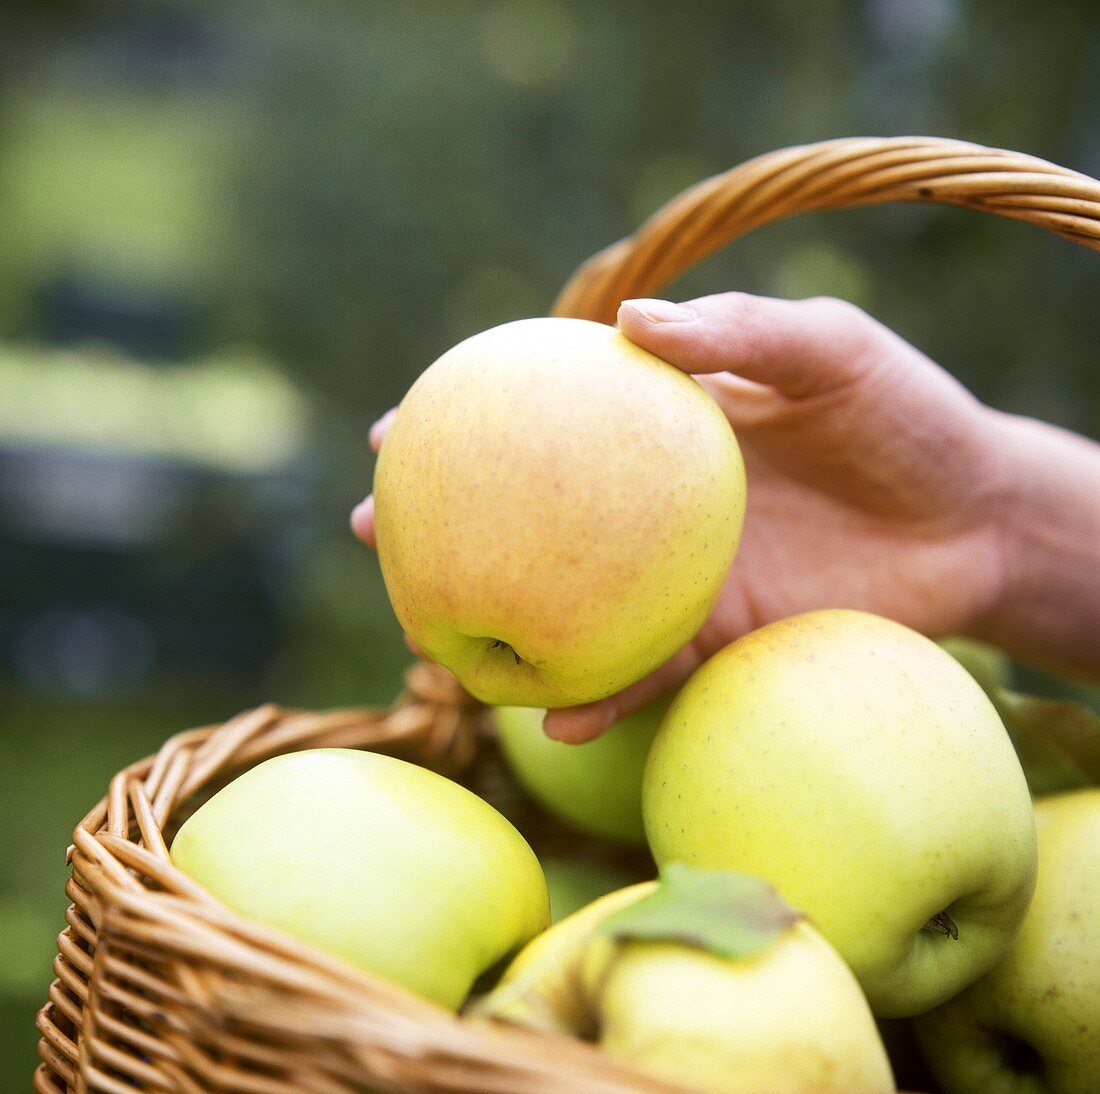 Hand taking a Golden Delicious apple out of a basket